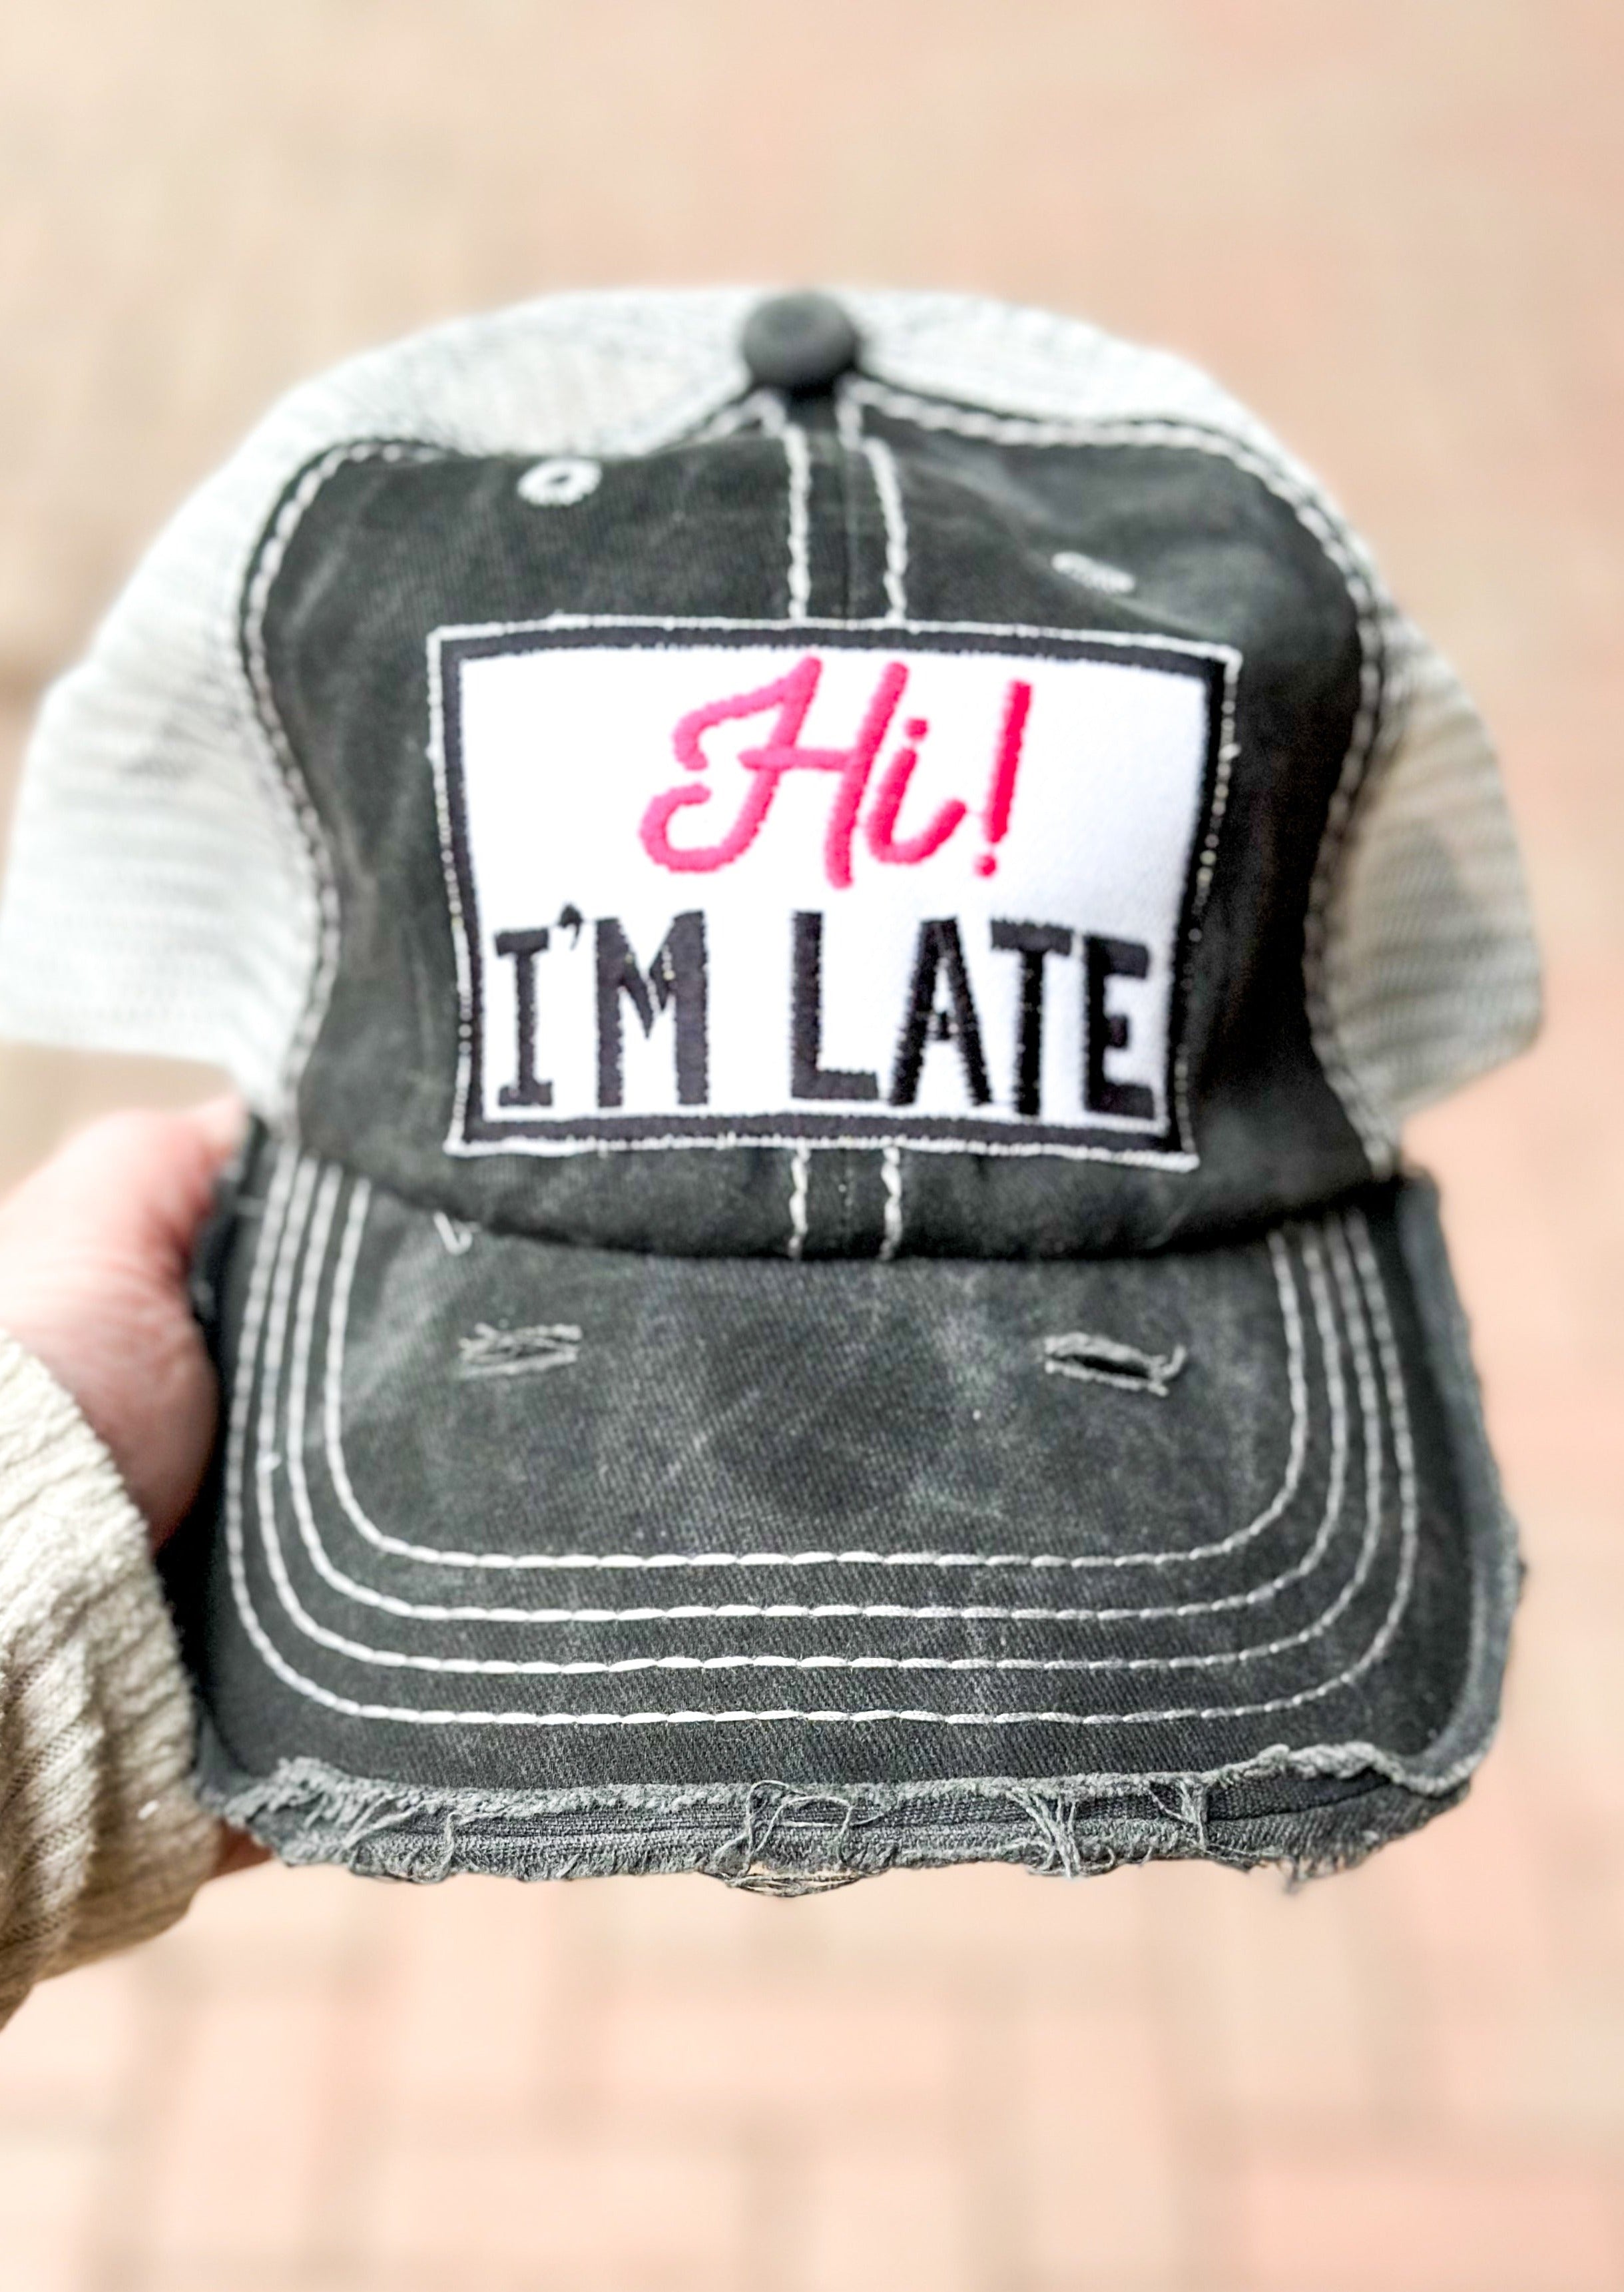 Charcoal trucker hat with white netting - patch attached that says Hi! I'm late.